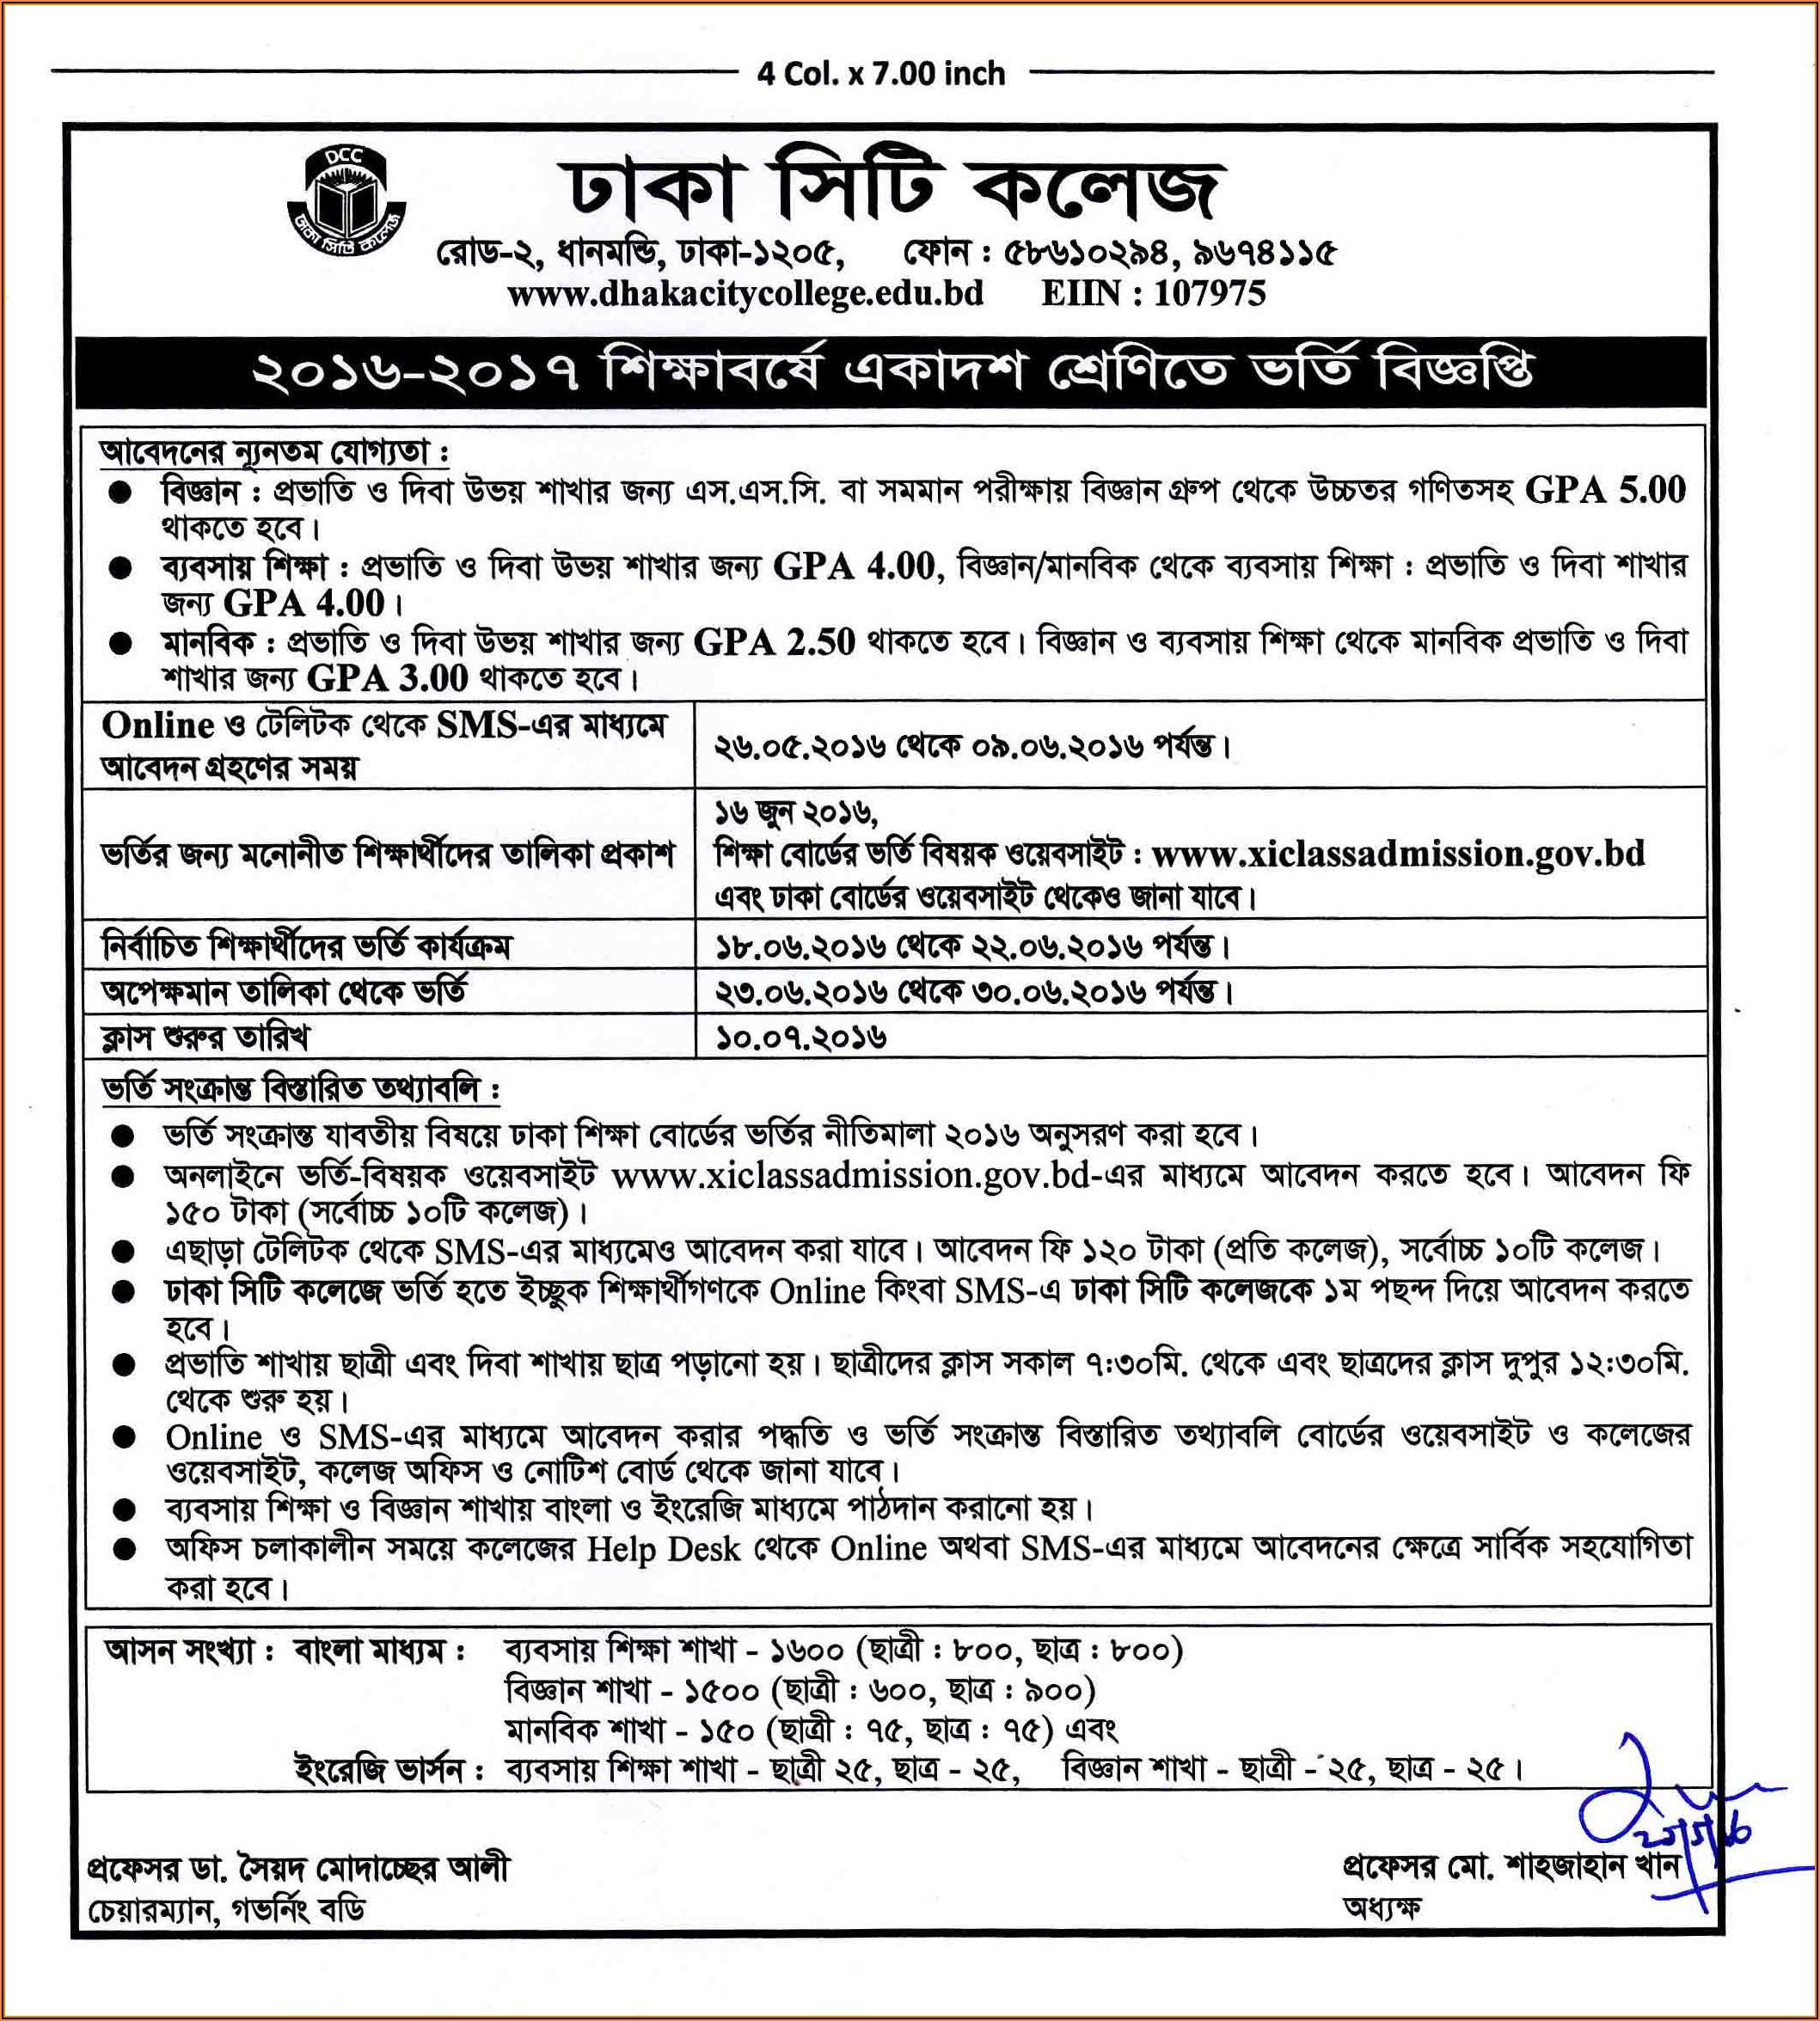 Dhaka City College Admission Form Download